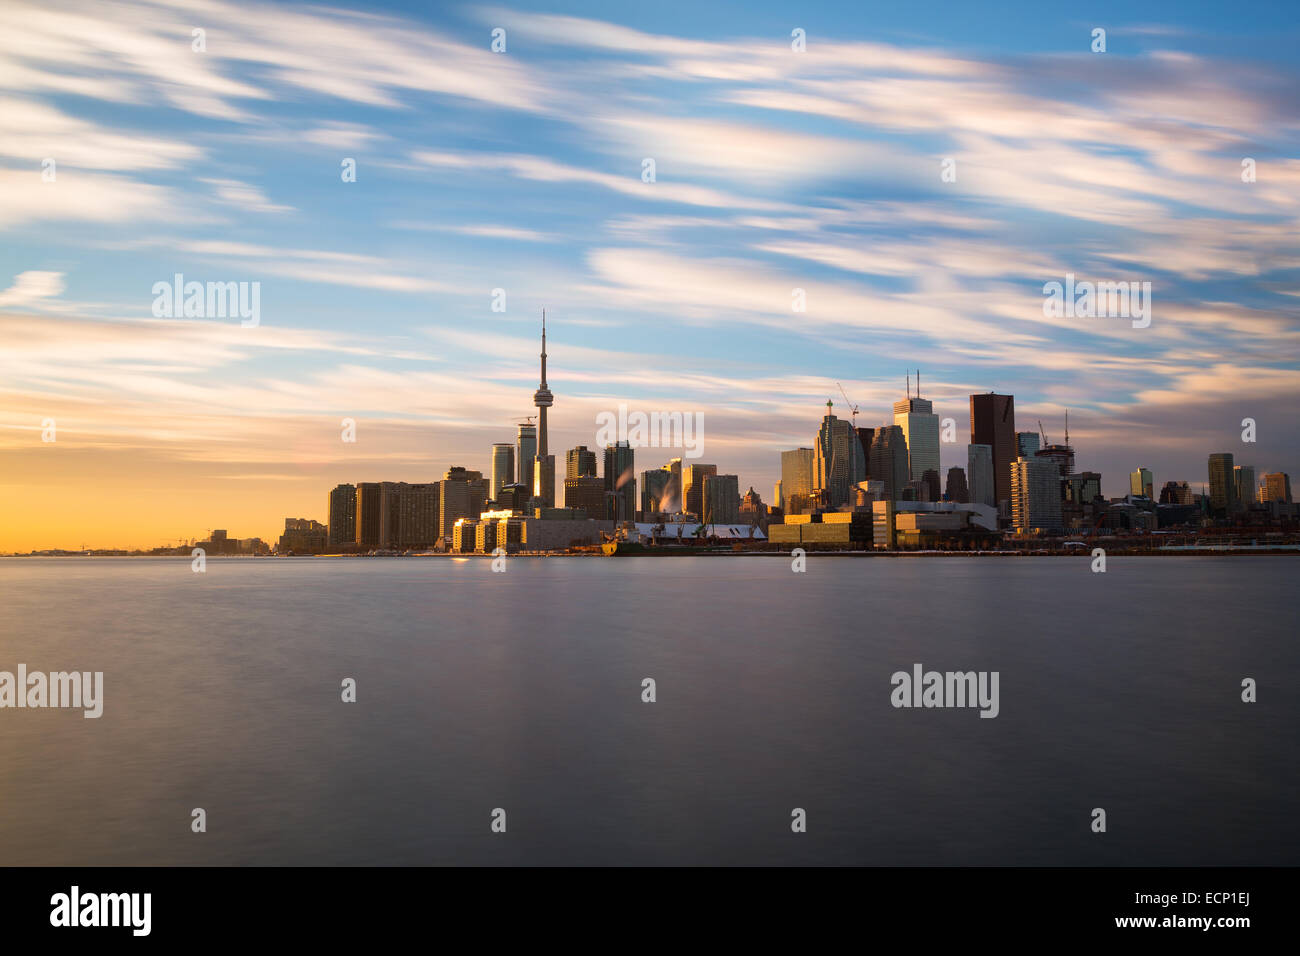 The Toronto skyline from the East at sunset taken with a long exposure Stock Photo